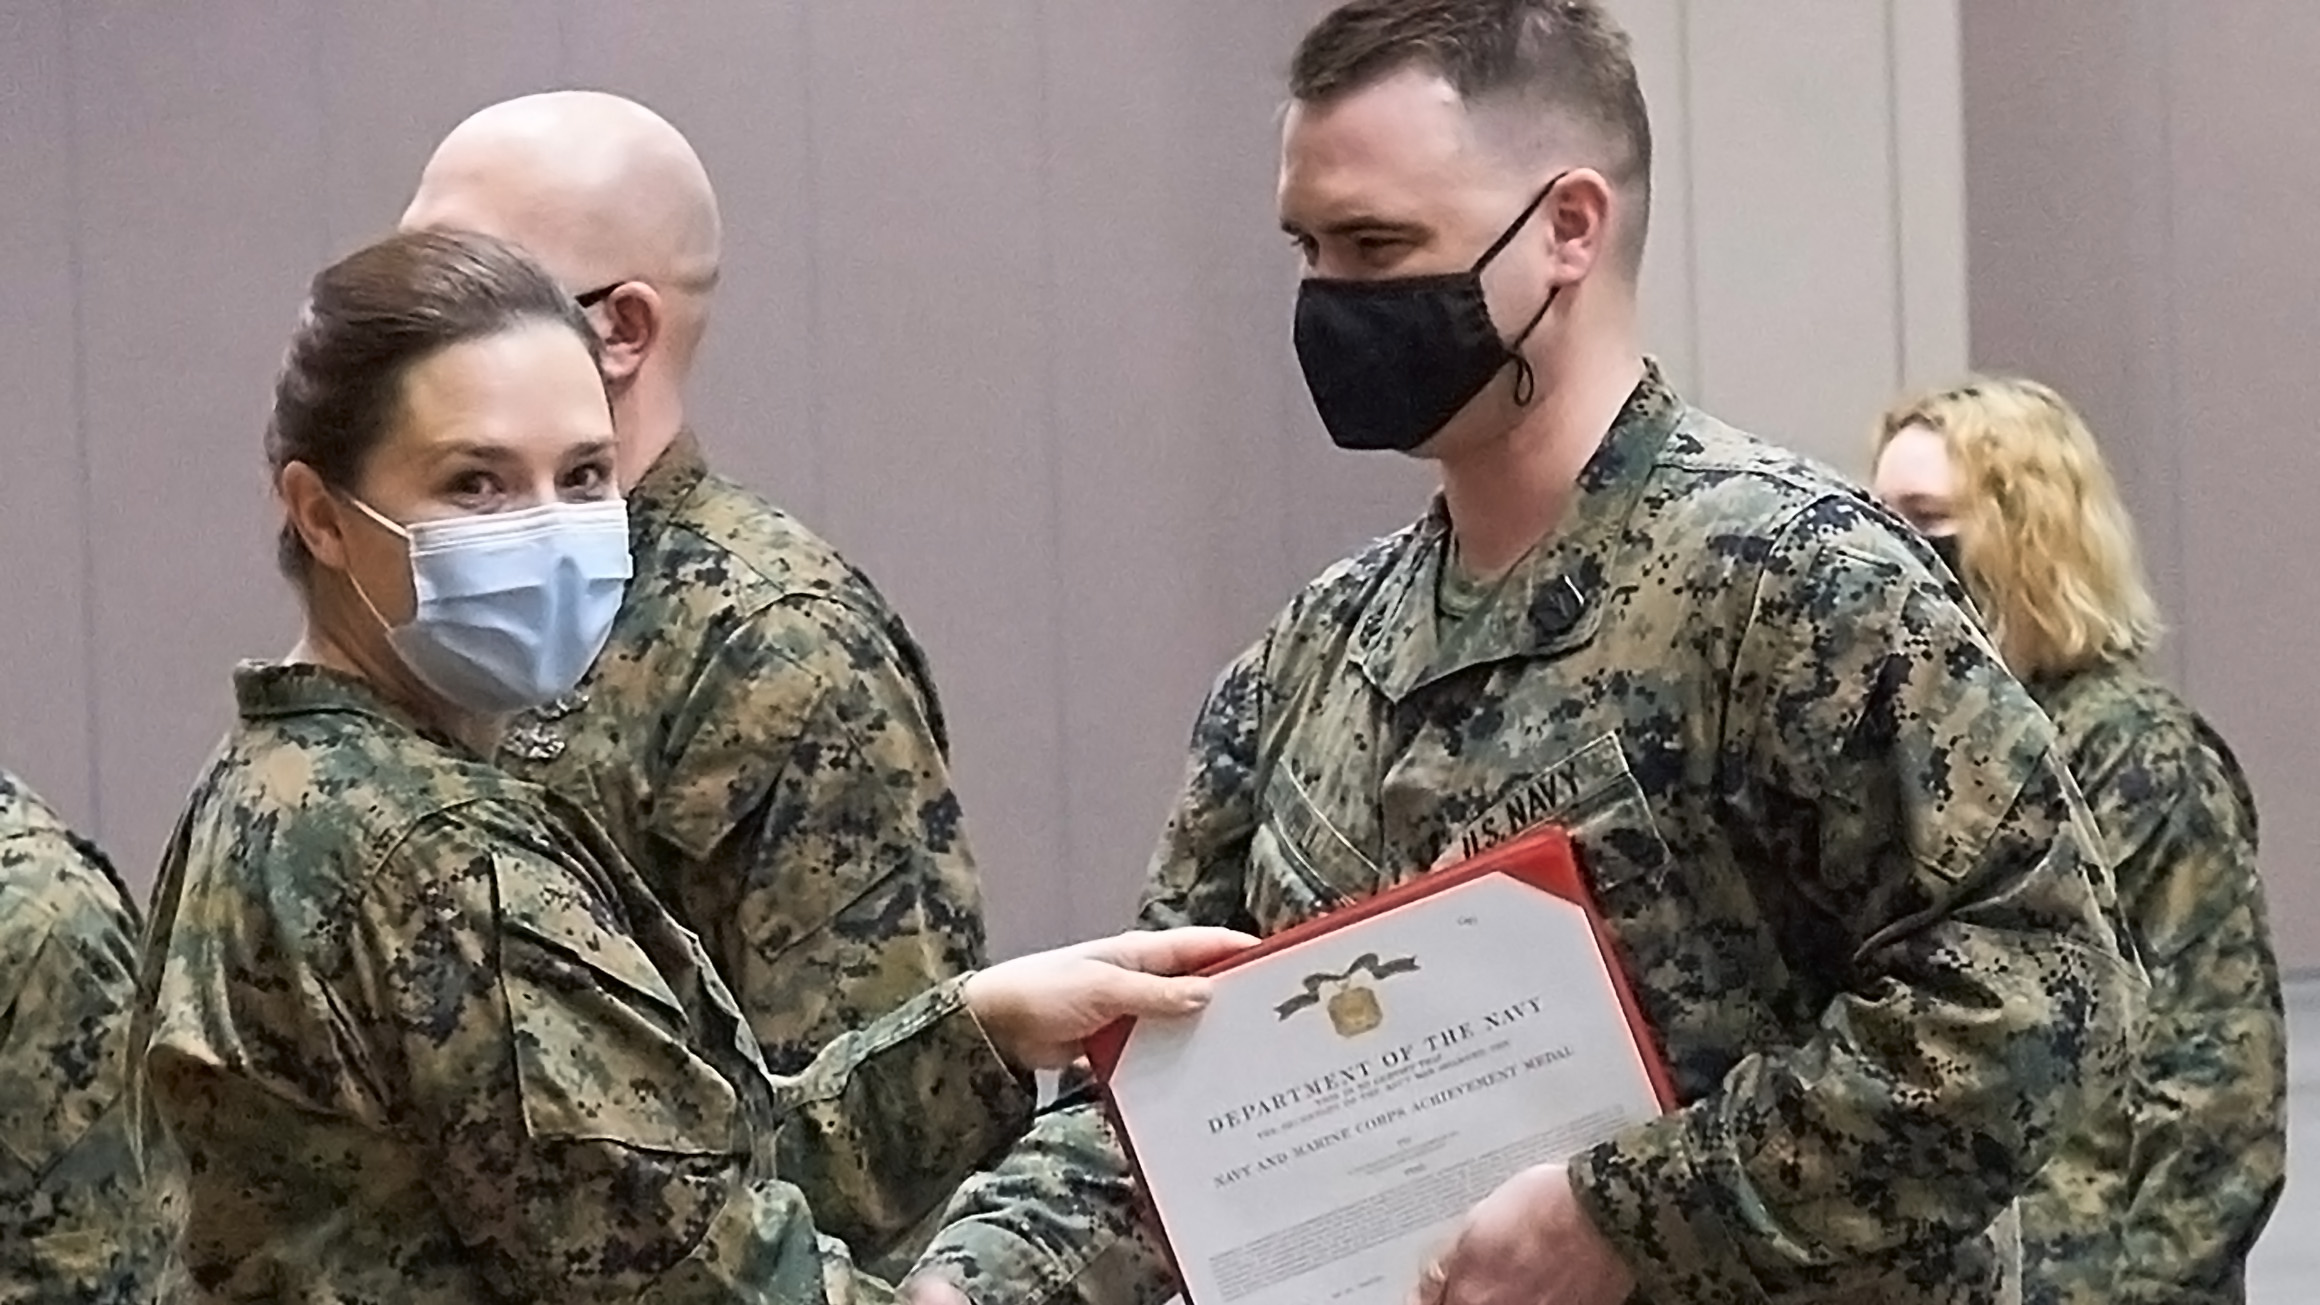 Bryan Hill is in camouflage and receives an award while wearing a mask